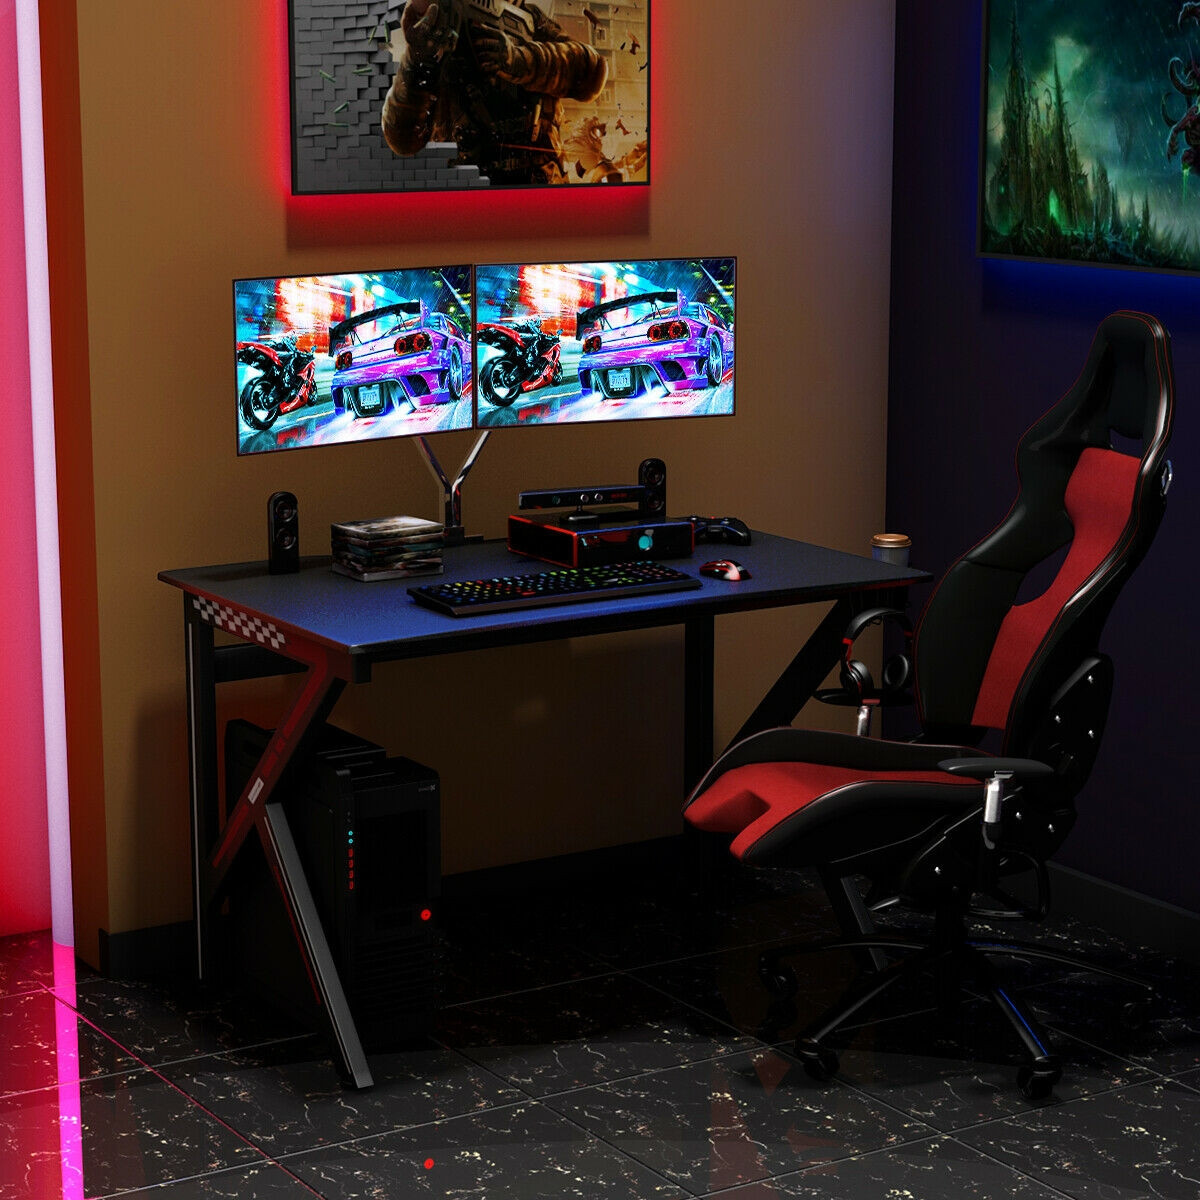 K-Shaped E-Sports Gaming Desk Gamers Computer Table